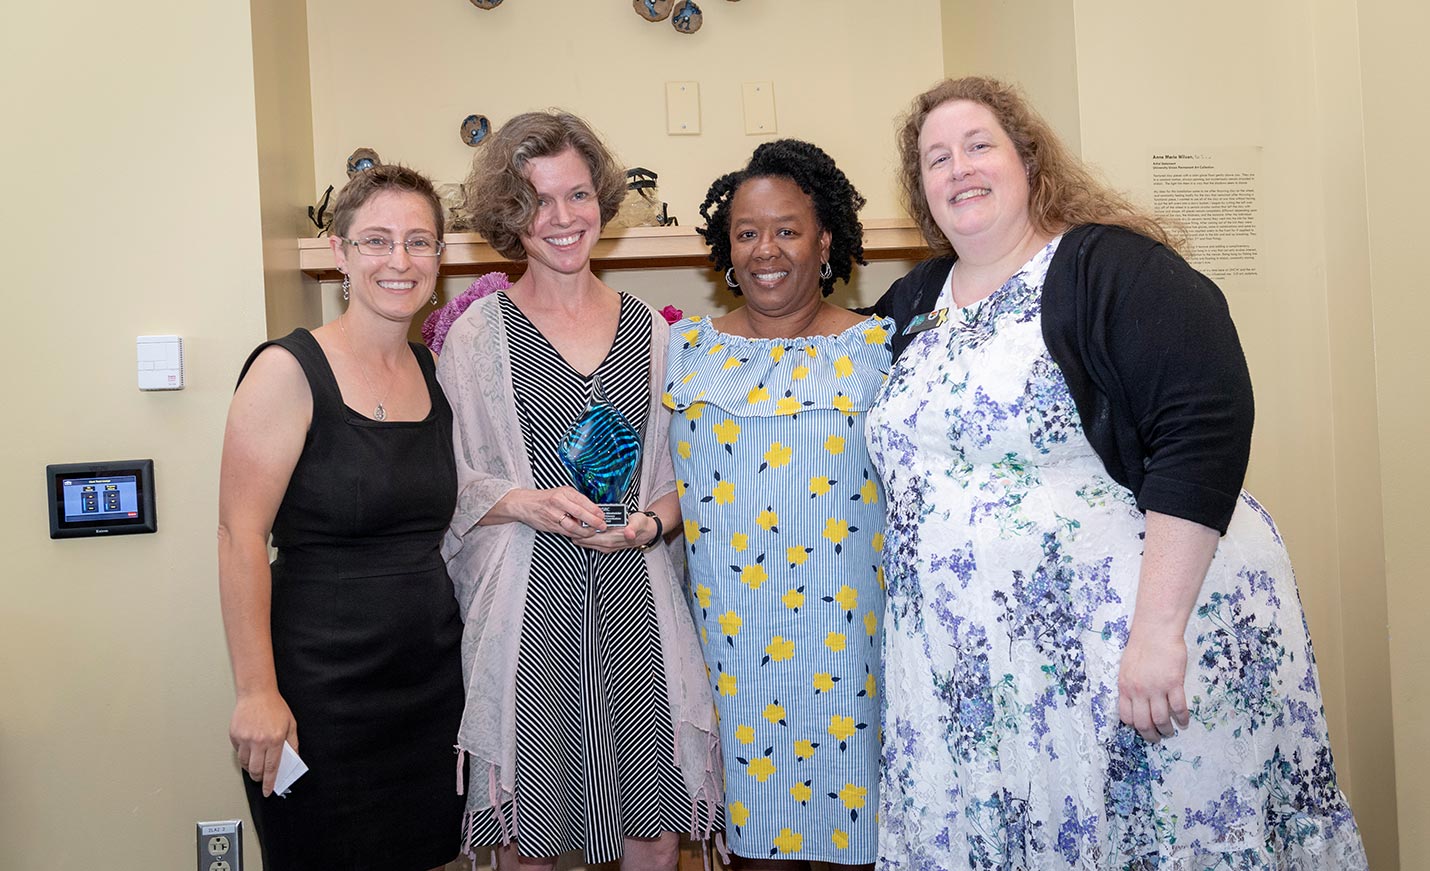 Four women stand together; the one second from left is holding a small award or trophy